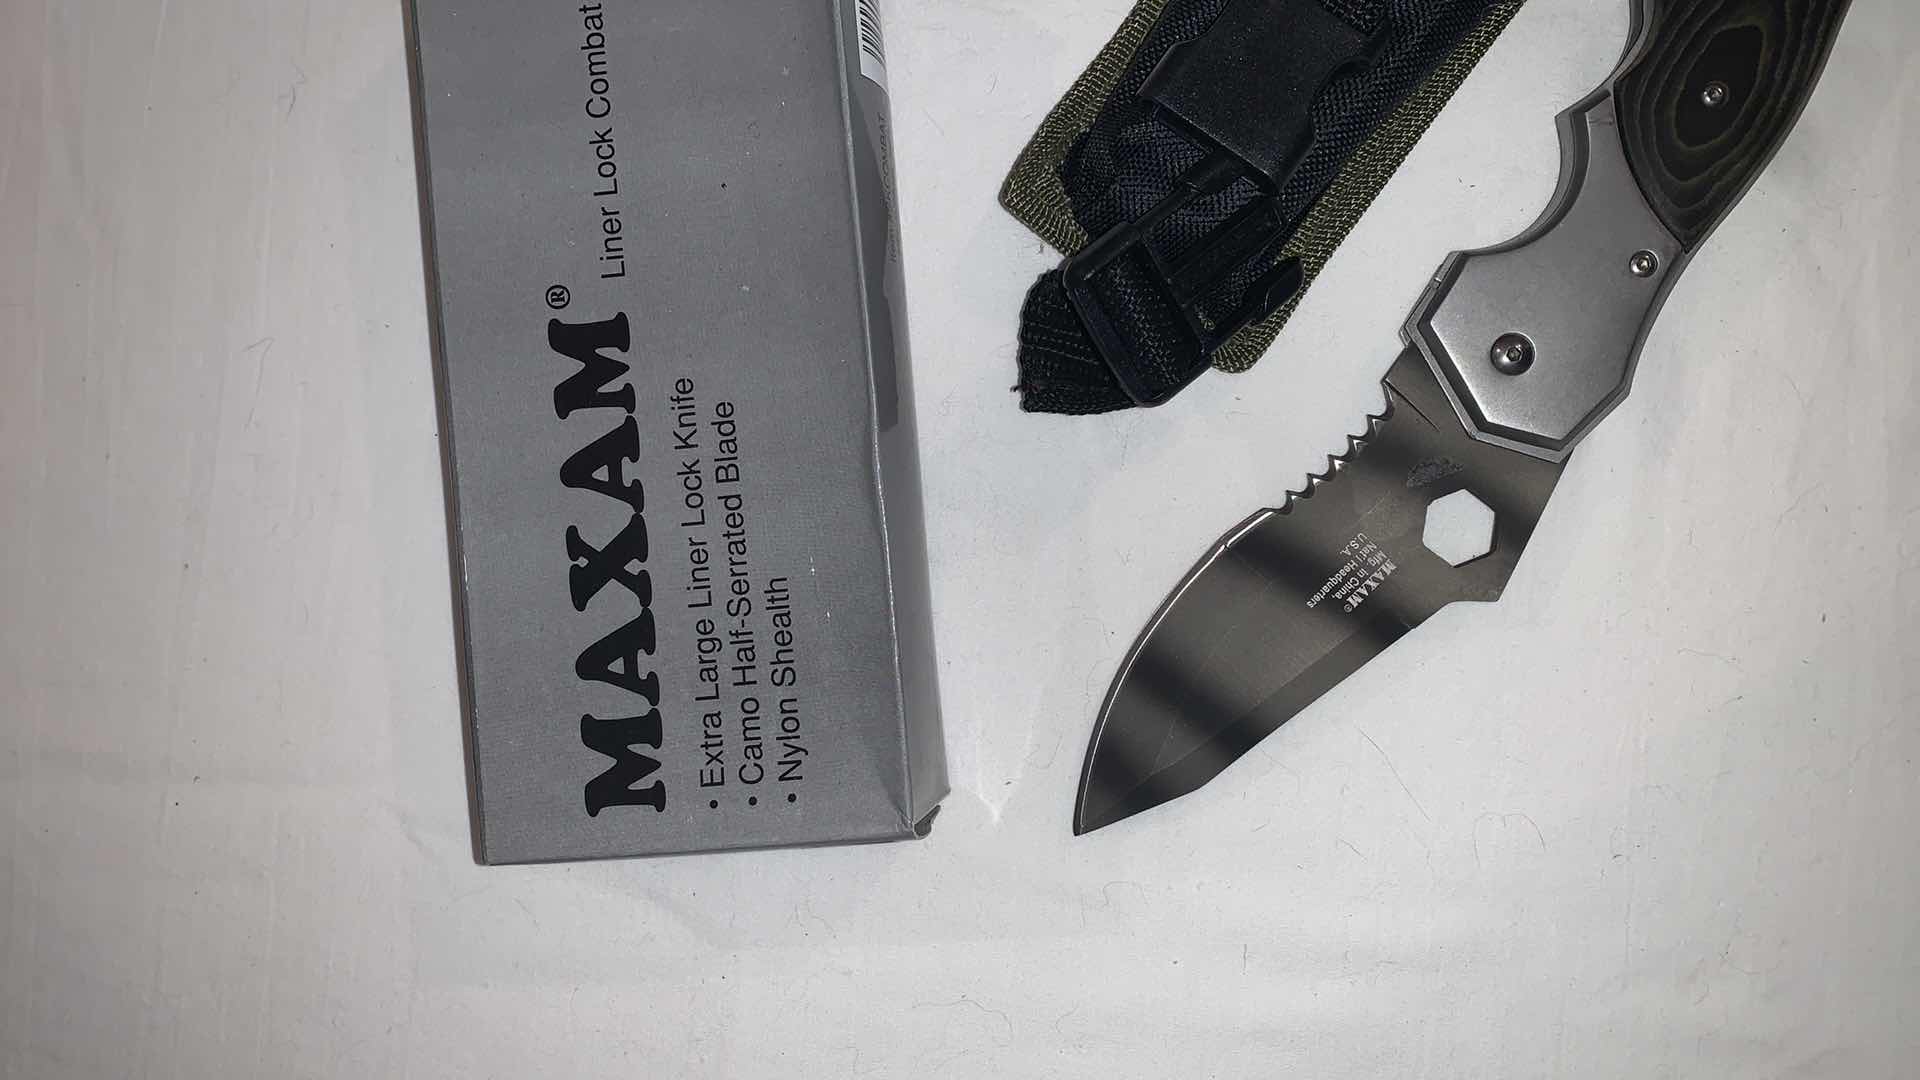 Photo 2 of MAXAM LINER LOCK COMBAT KNIFE WITH CASE